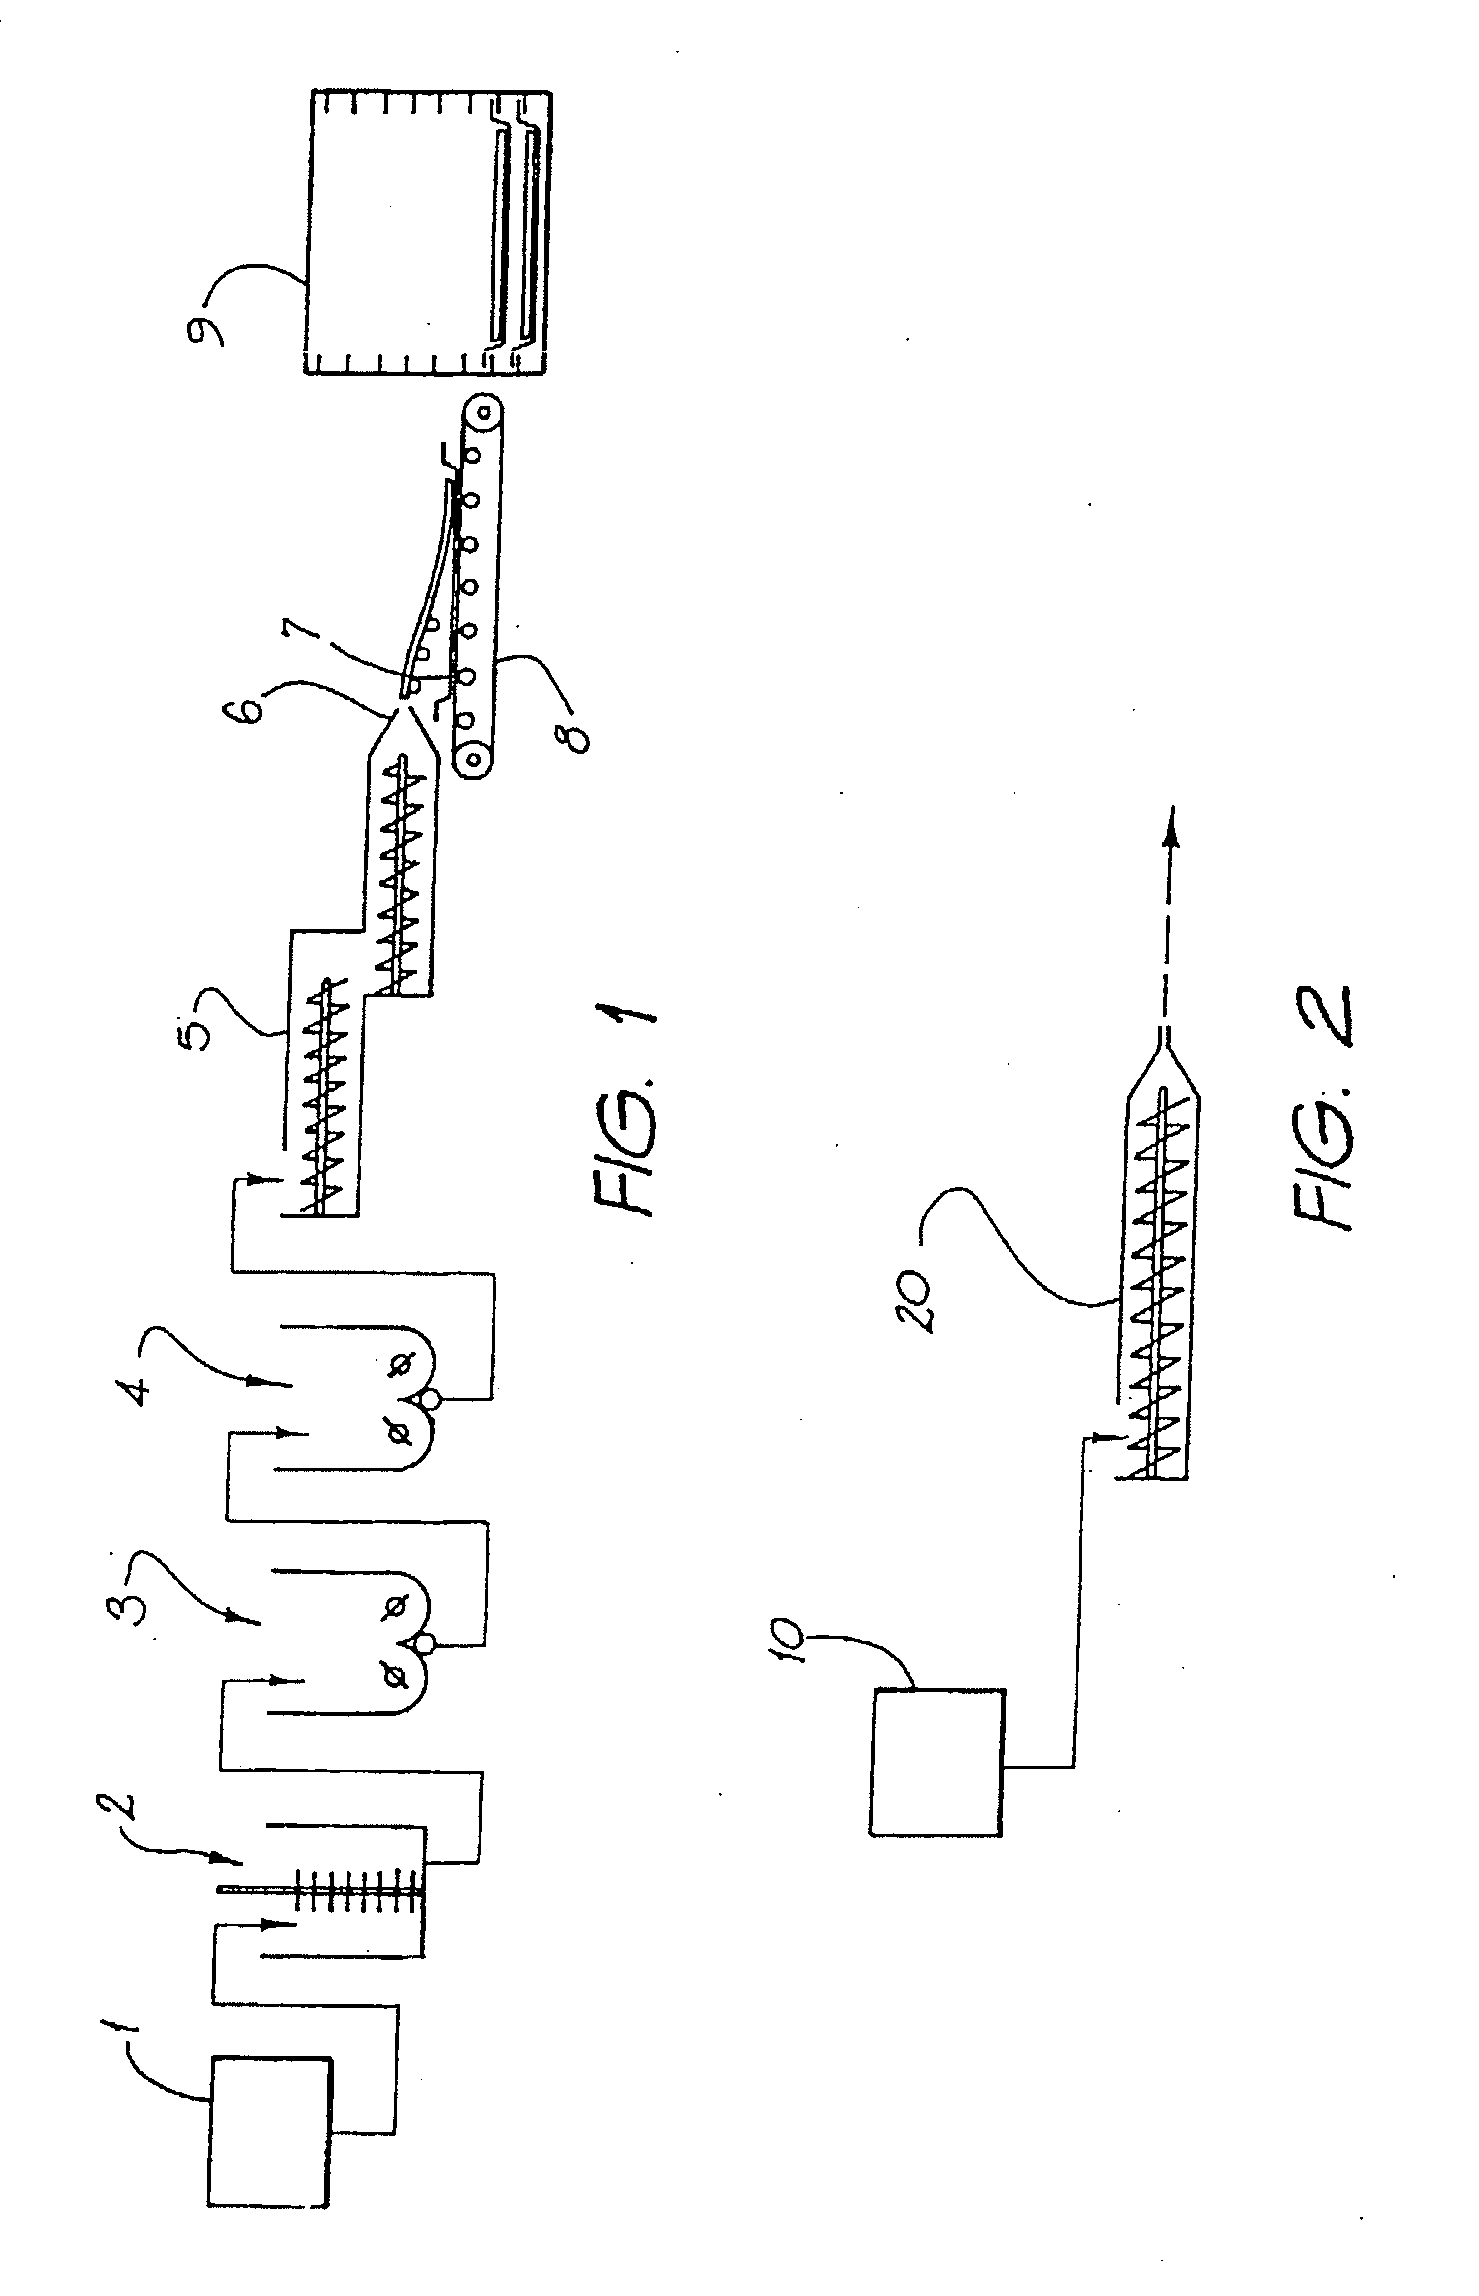 Method and Apparatus for Extruding Cementitious Articles